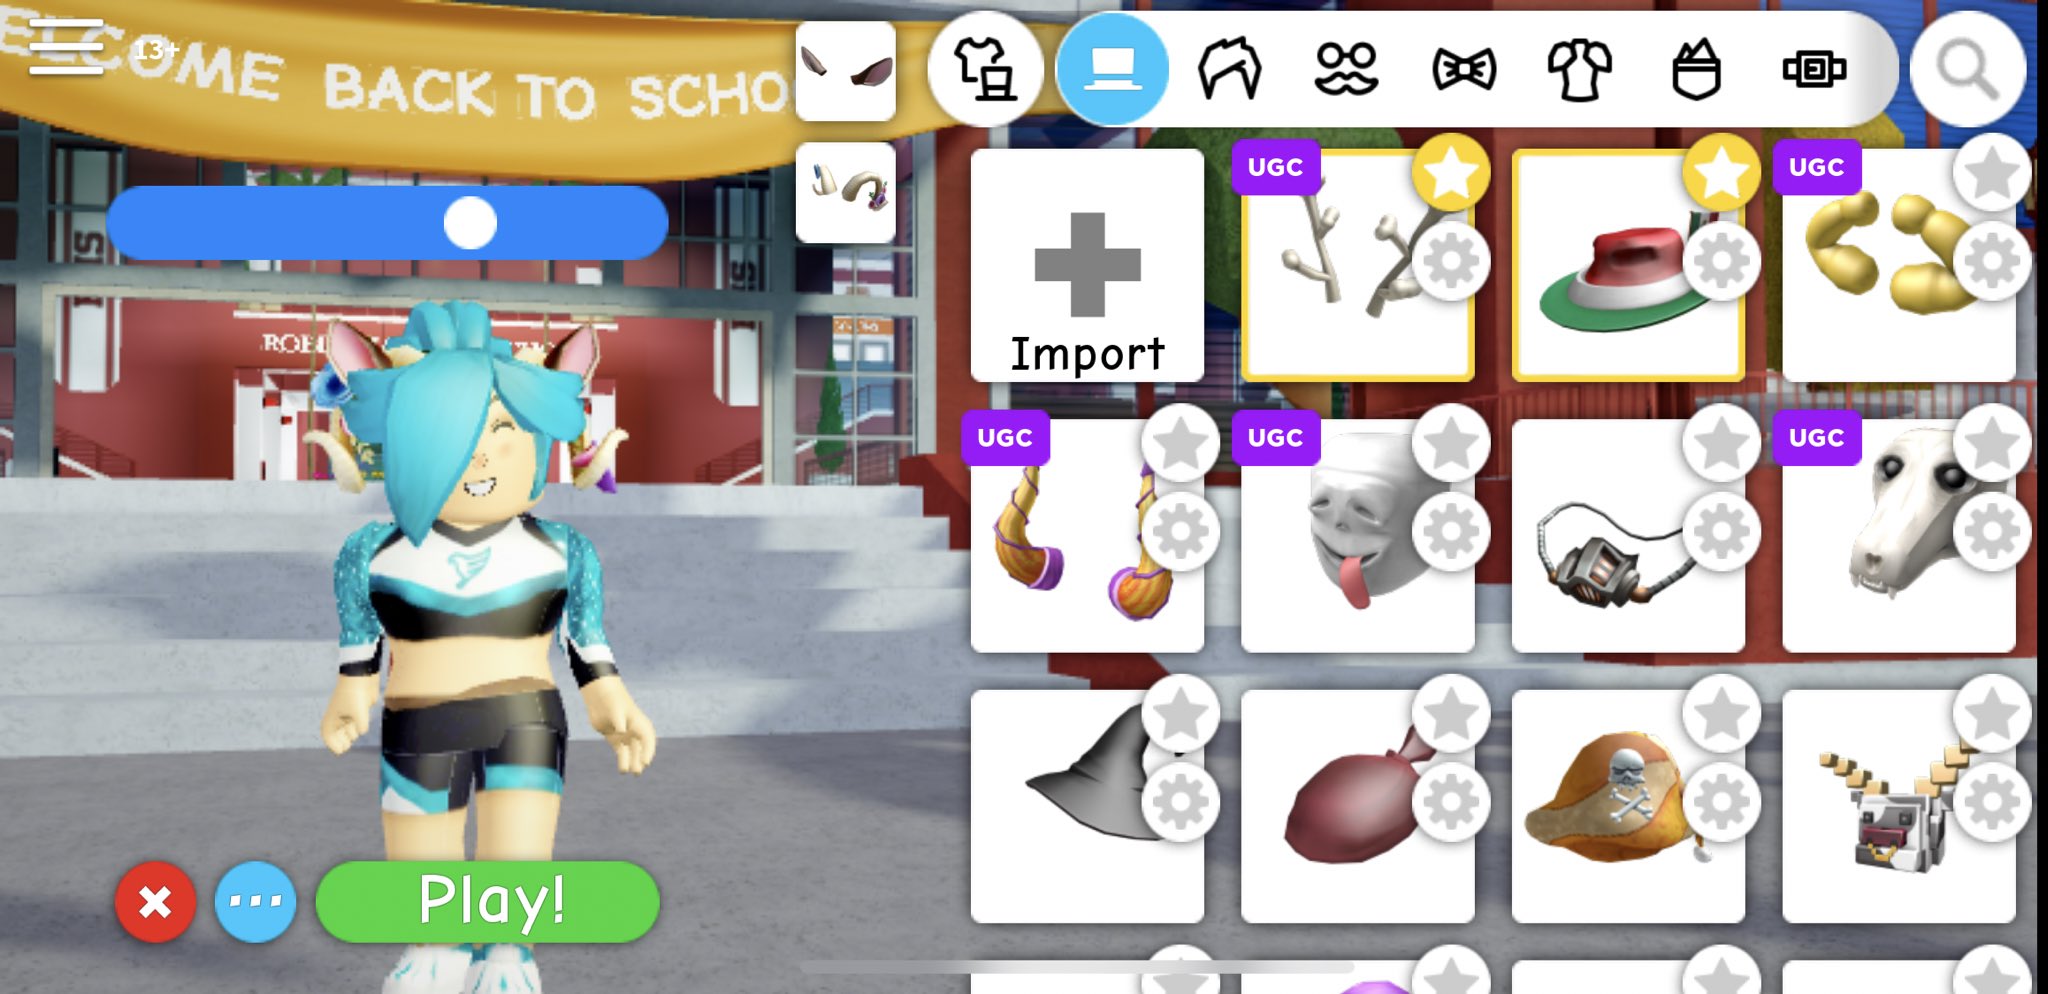 Robloxian High School On Twitter Last Night We Released An Update To The Avatar Editor That Squashed Some Bugs And Improves Your Experience Bubble Chat Hidden In Editor Can Now